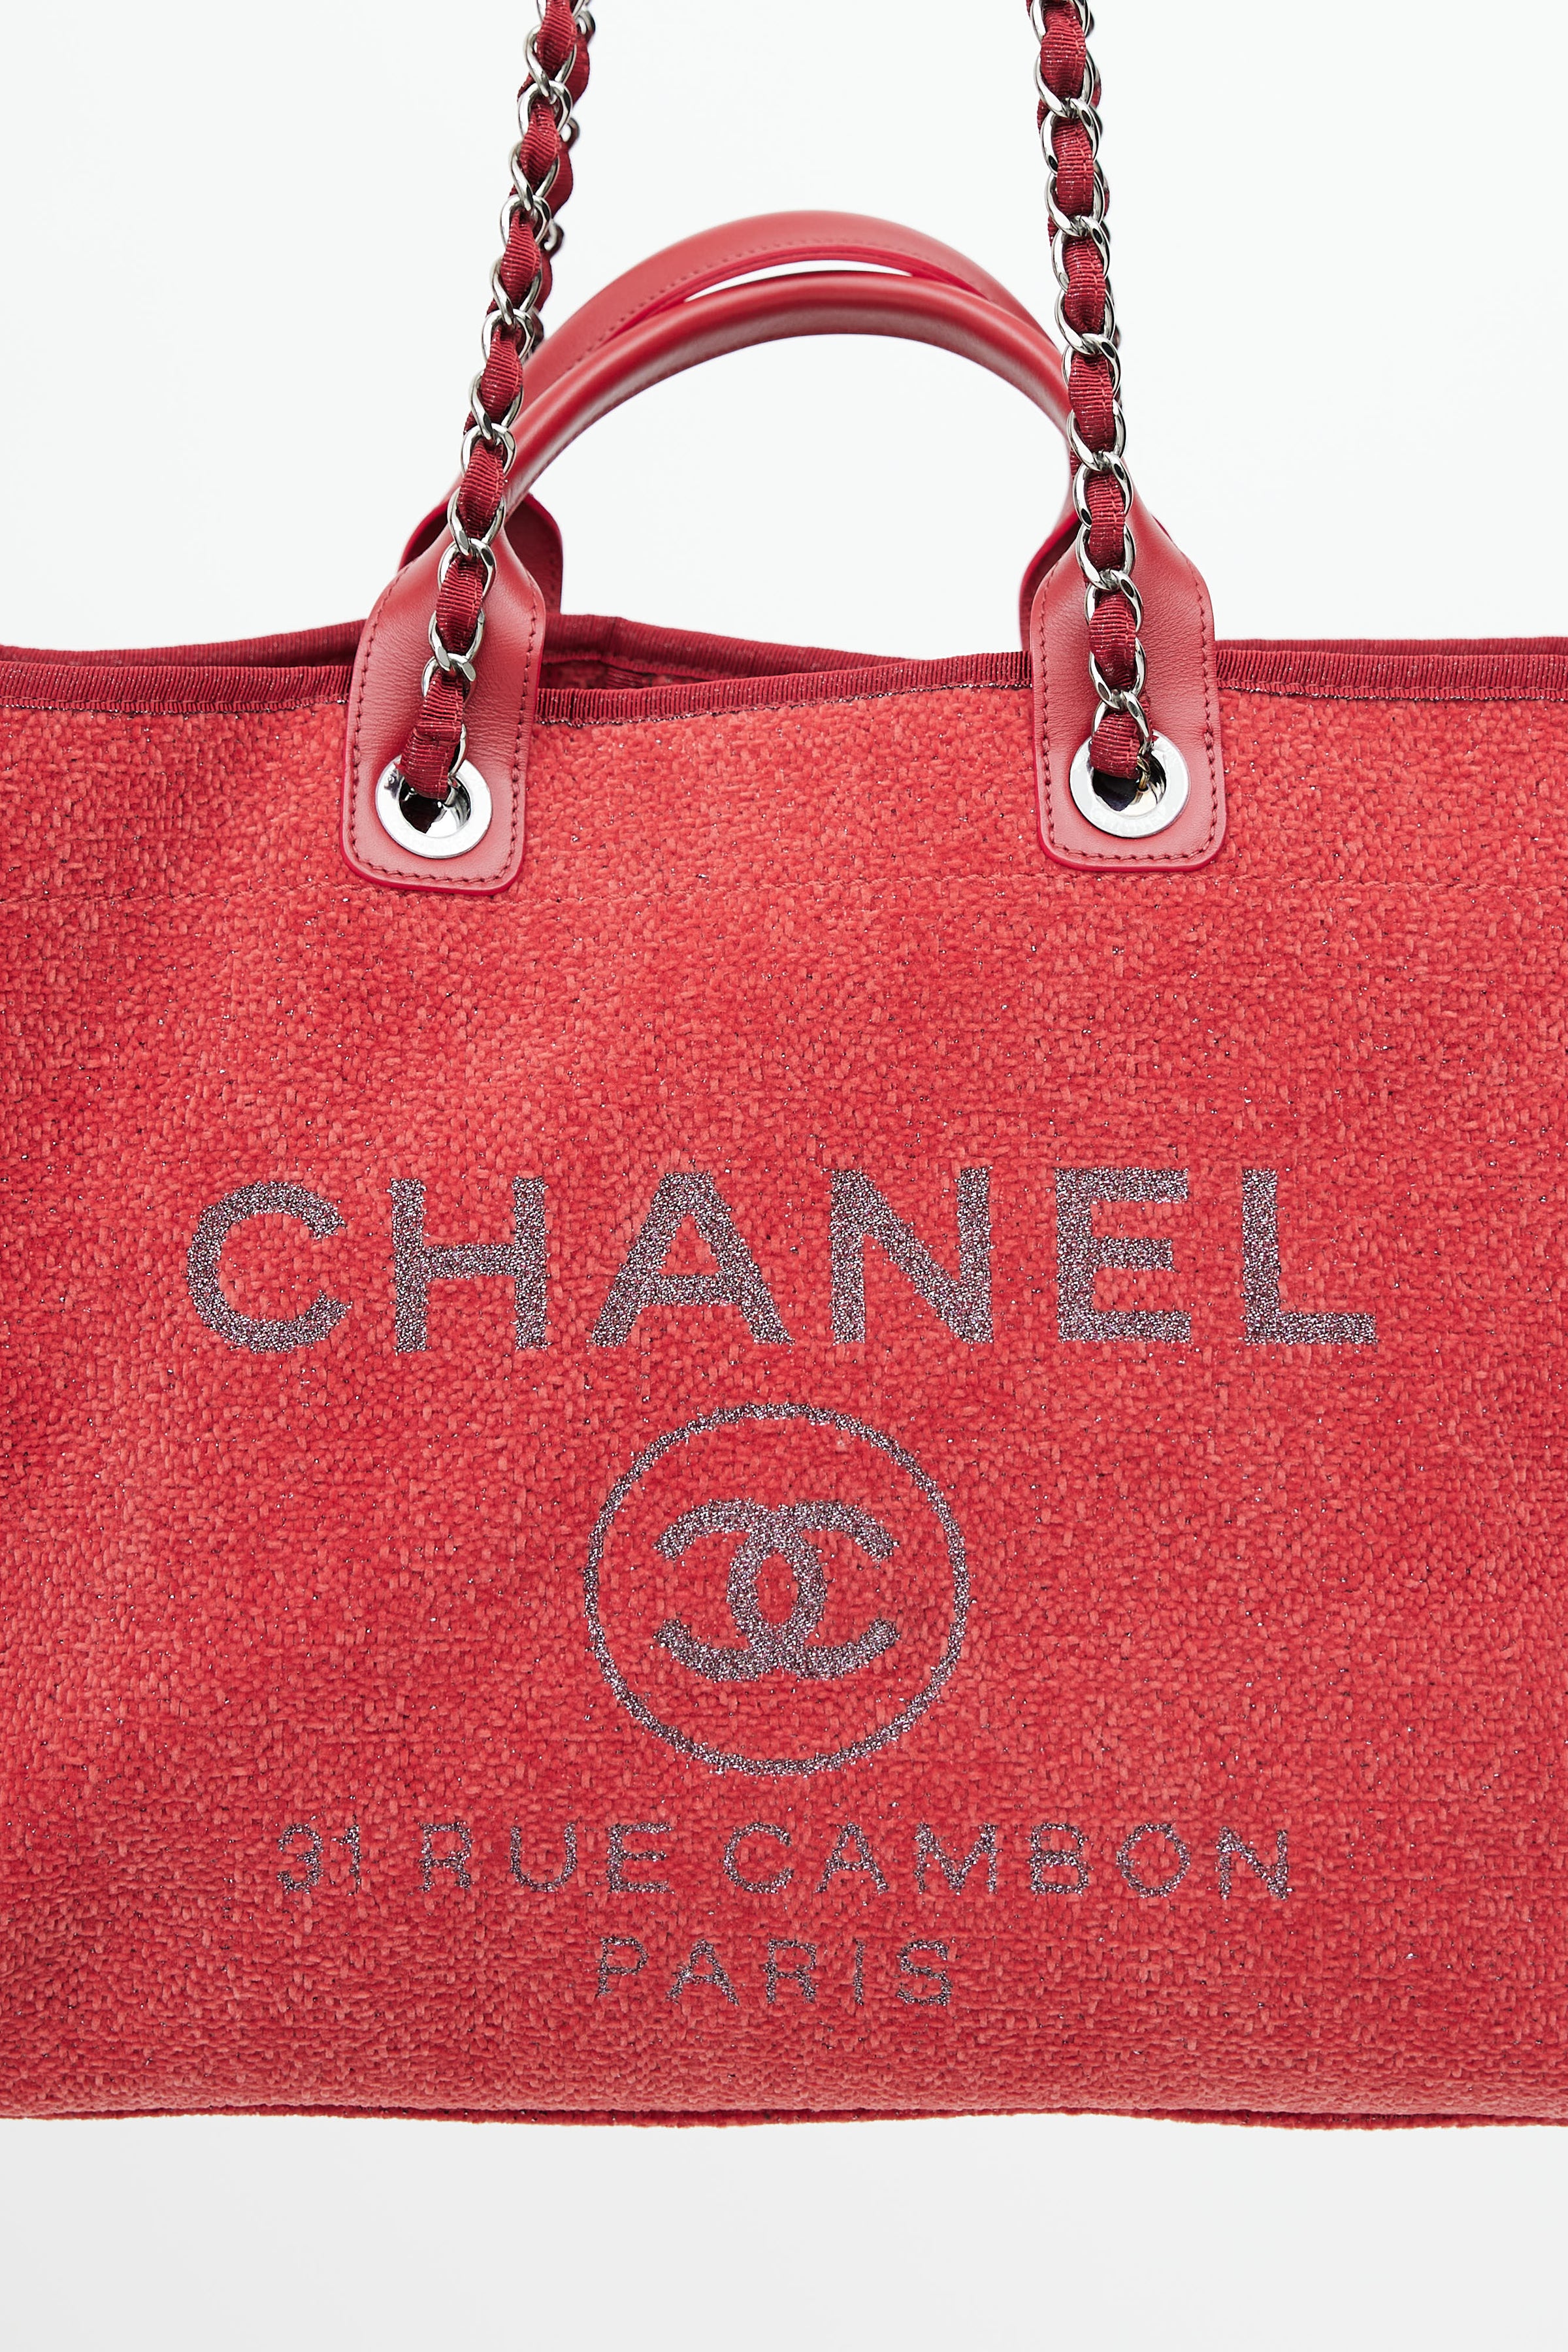 Chanel // 2019 Red Textured Deauville Large Tote Bag – VSP Consignment